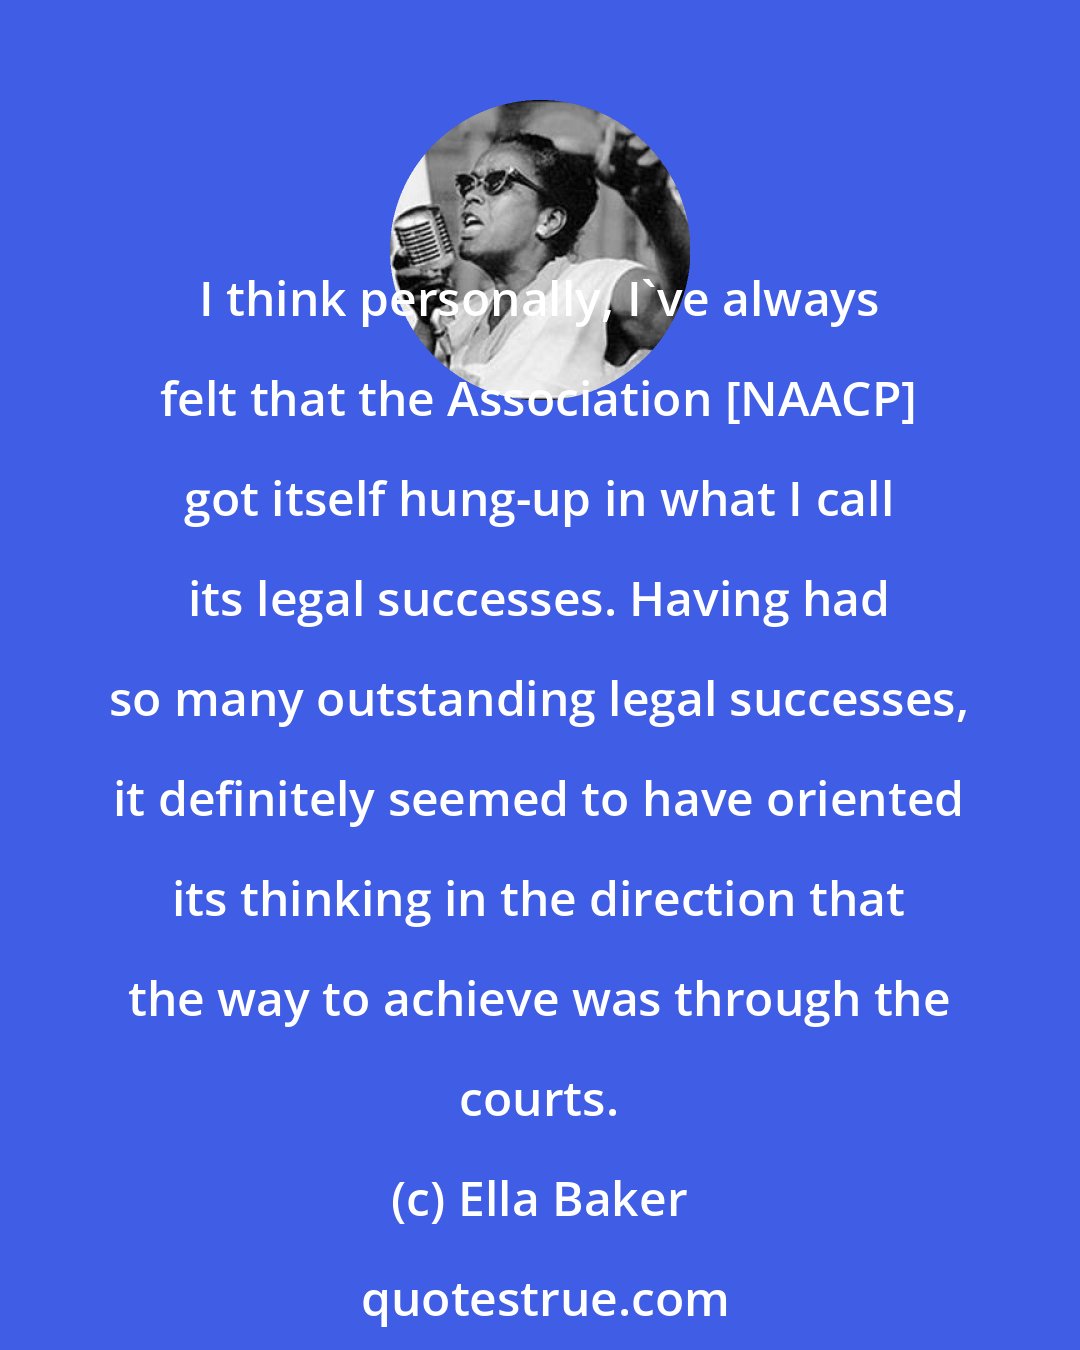 Ella Baker: I think personally, I've always felt that the Association [NAACP] got itself hung-up in what I call its legal successes. Having had so many outstanding legal successes, it definitely seemed to have oriented its thinking in the direction that the way to achieve was through the courts.